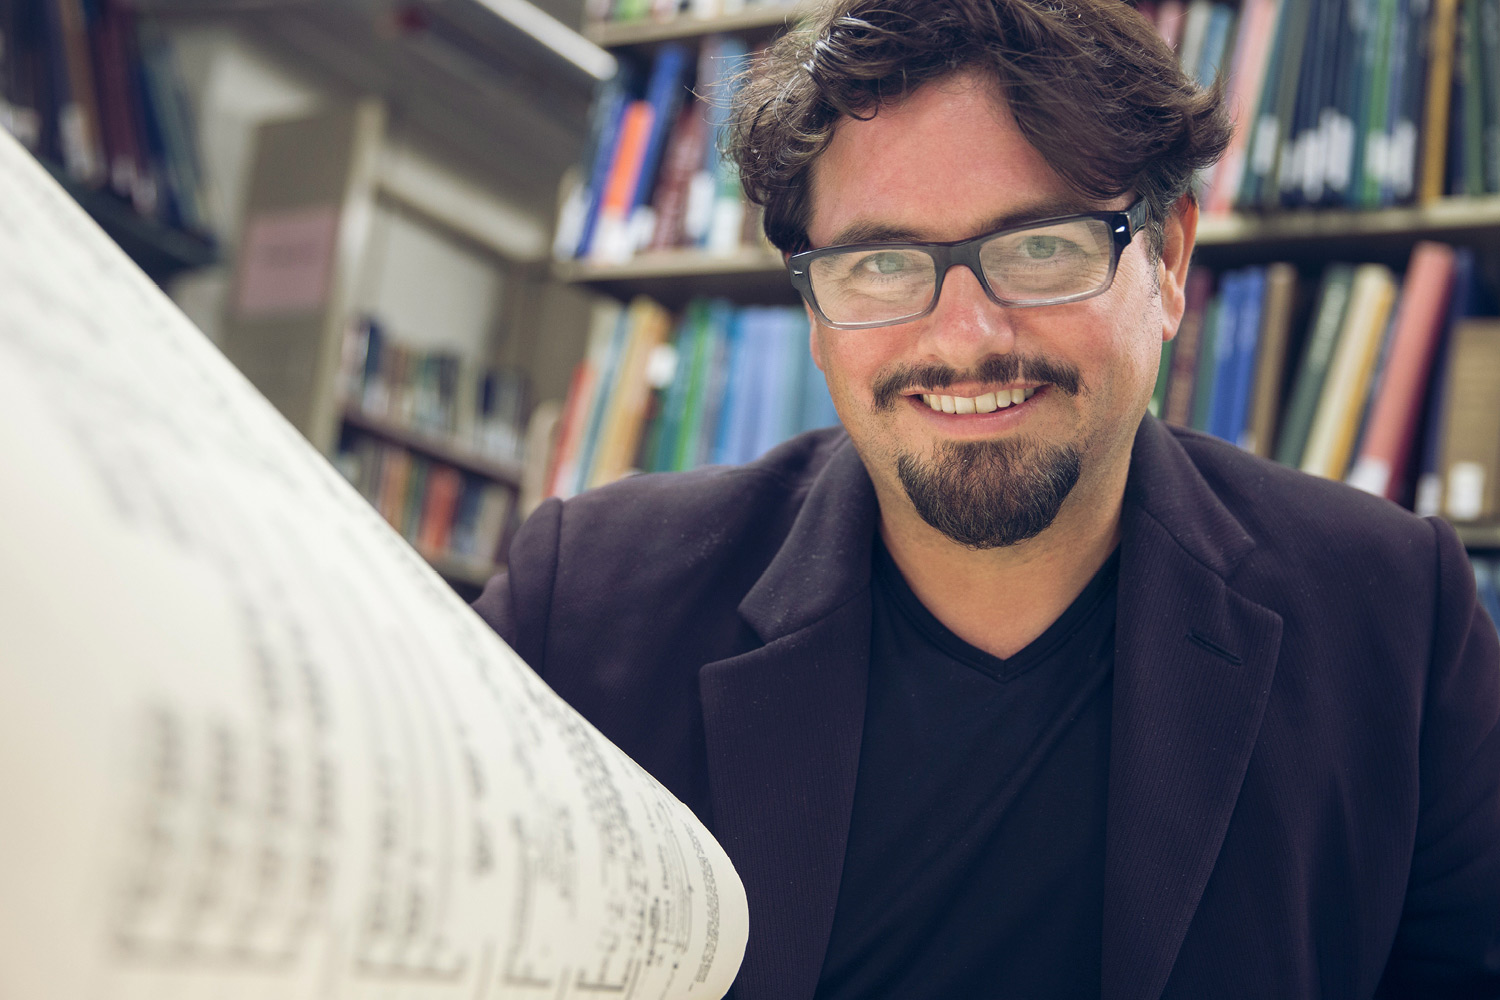 Music professor Matthew Burtner, whose own work combines music and environmental concerns in his native Alaska, will lead a discussion of “Landfill Harmonic.” (Photo by Dan Addison, University Communications)